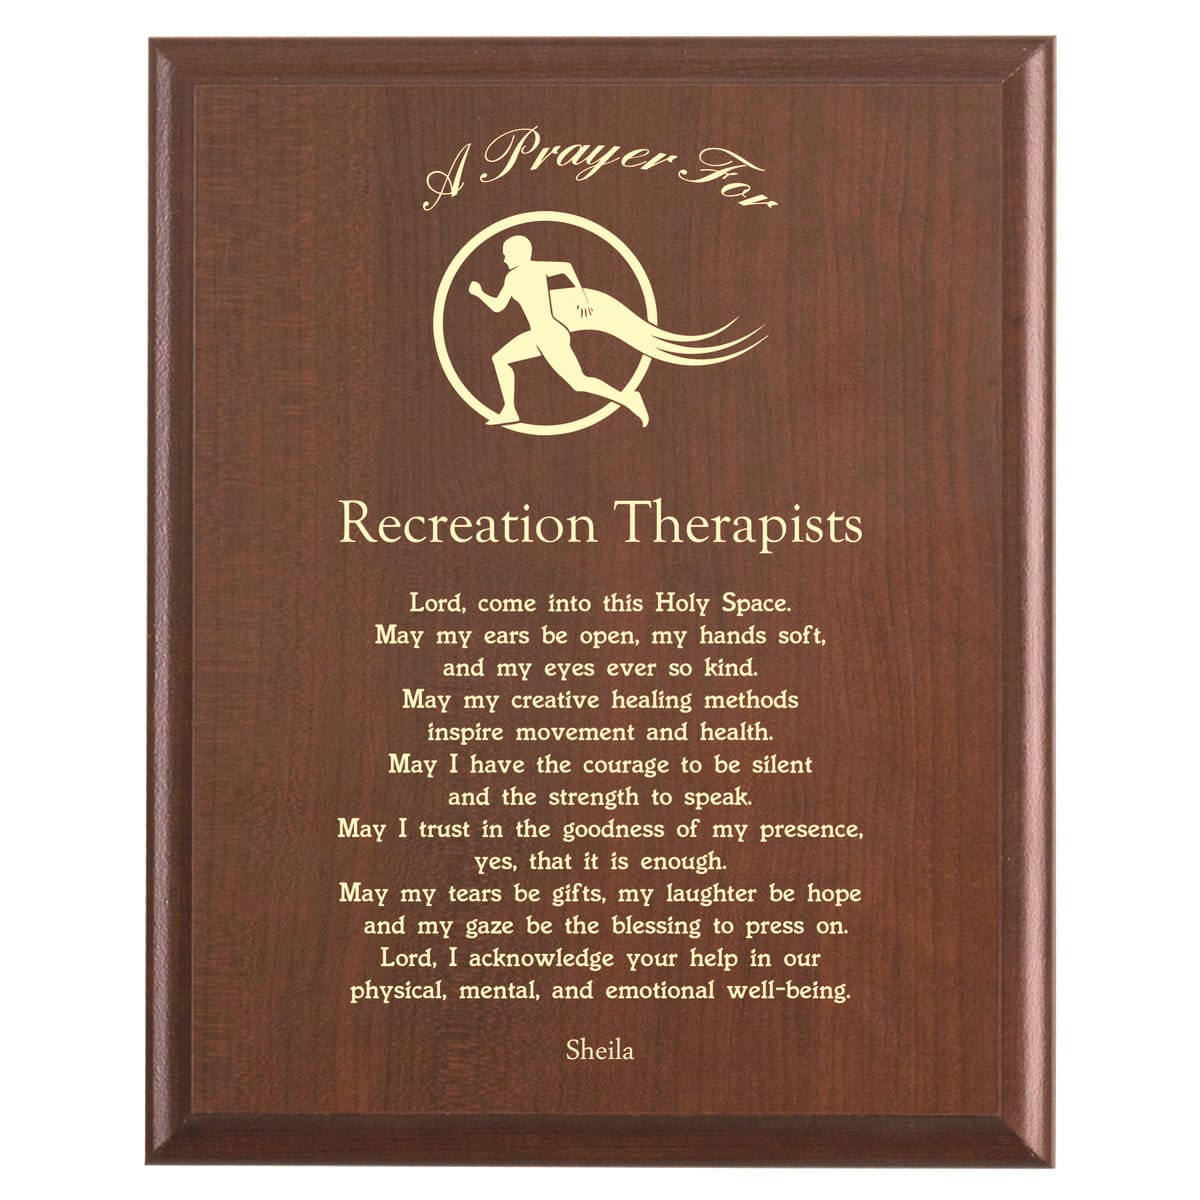 Plaque photo: Recreation Therapist Prayer Plaque design with free personalization. Wood style finish with customized text.